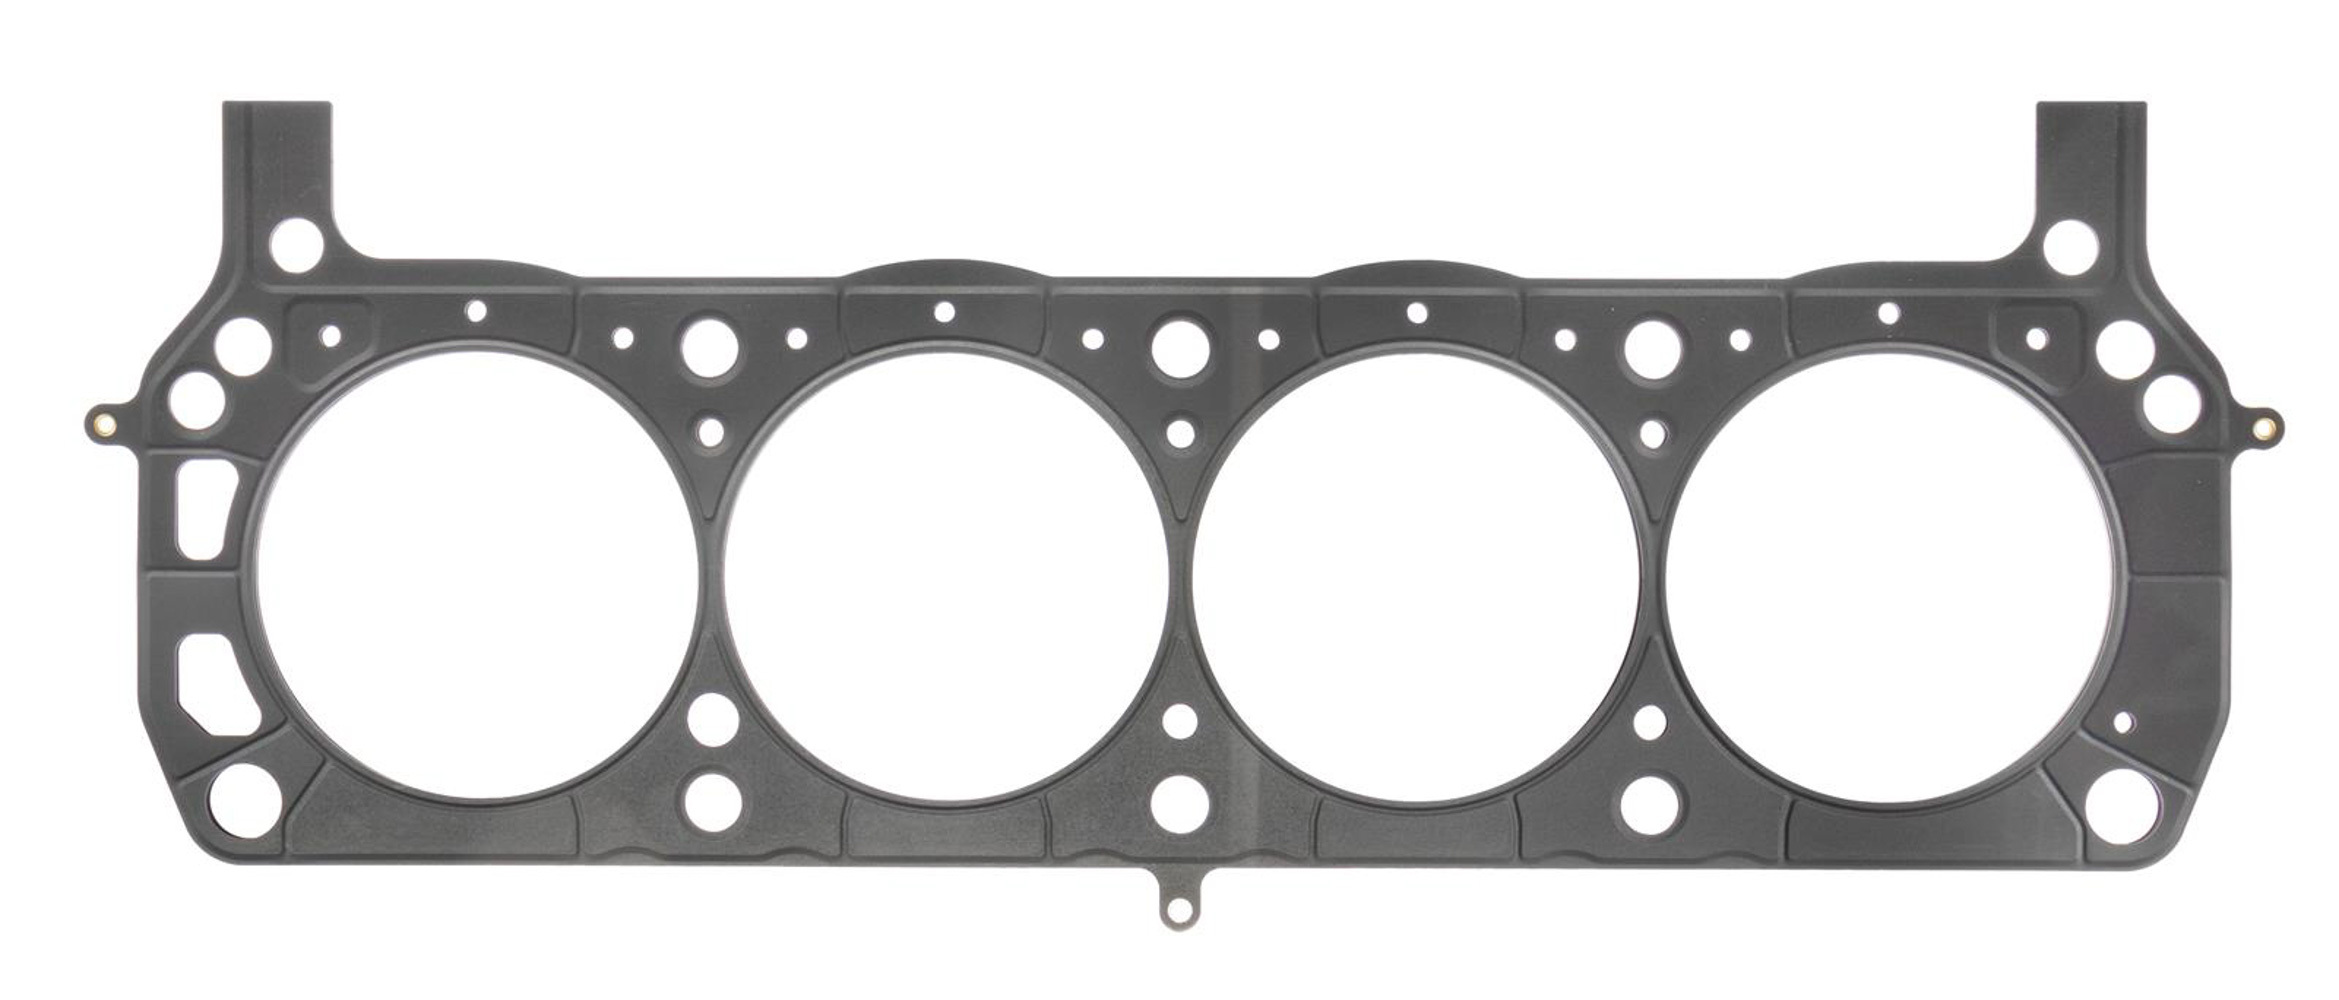 SCE Gaskets M361539GS - Cylinder Head Gasket, MLS Spartan, 4.155 in Bore, 0.039 in Compression Thickness, Multi-Layer Steel, Small Block Ford, Each